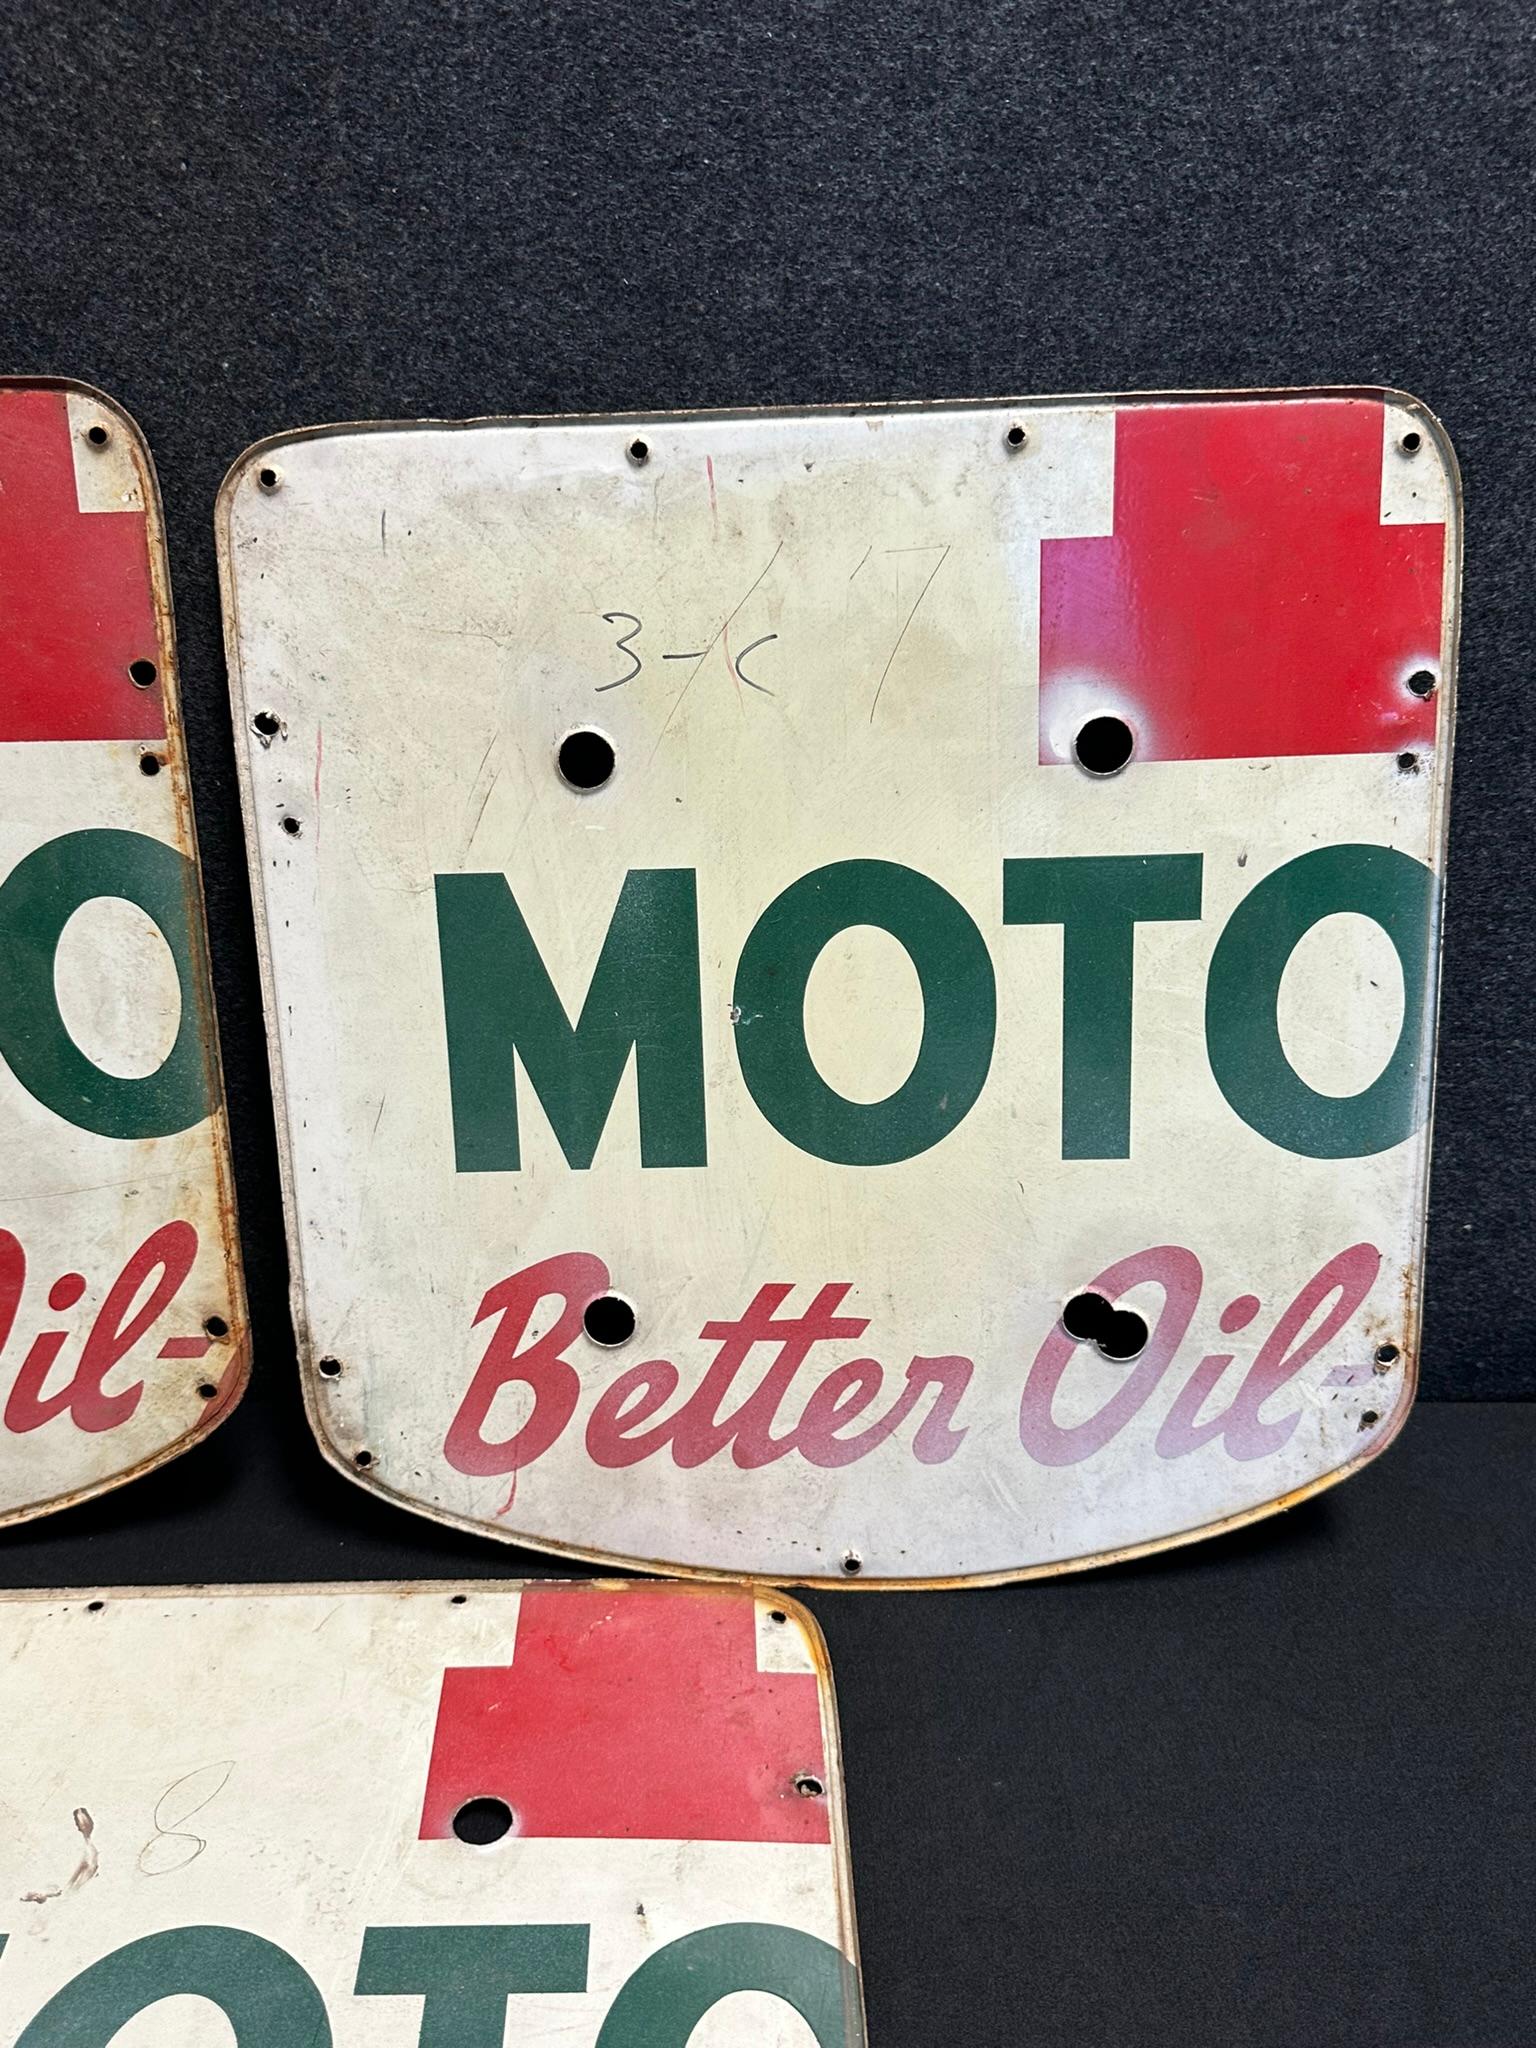 Lot 3 Conoco Motor Oil Better Oil Cut Advertising Signs